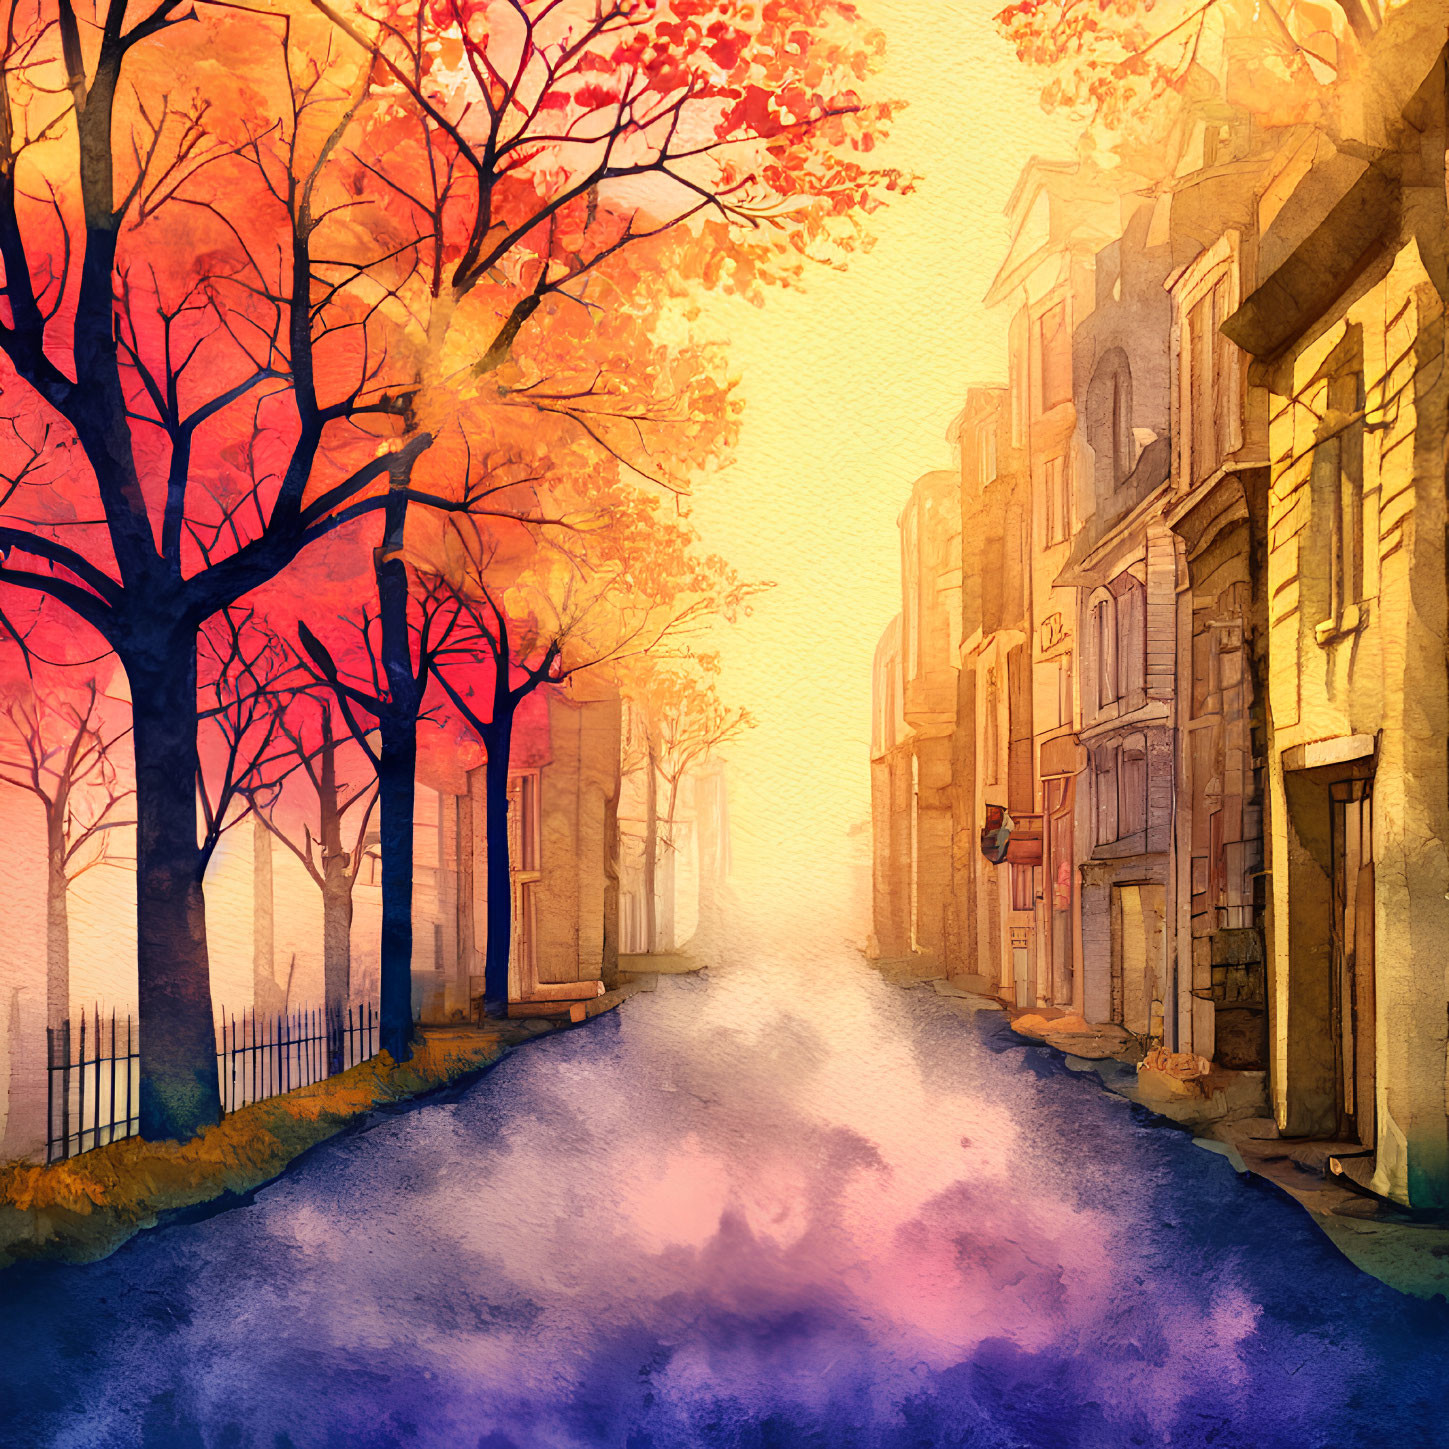 Autumnal street scene watercolor painting with warm-toned trees and quaint buildings.